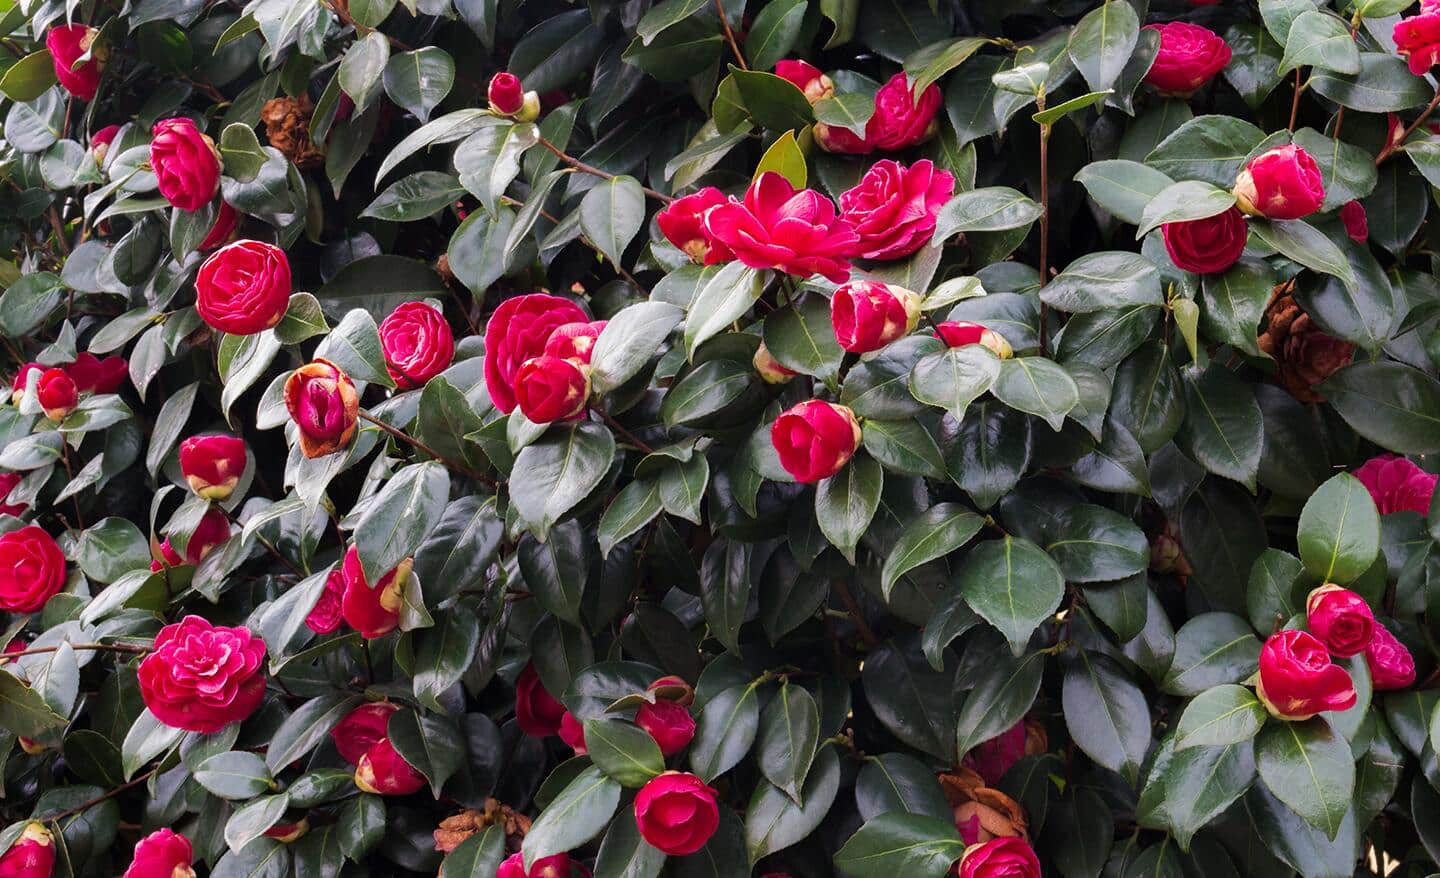 Red camellia blooms on a camellia shrubs